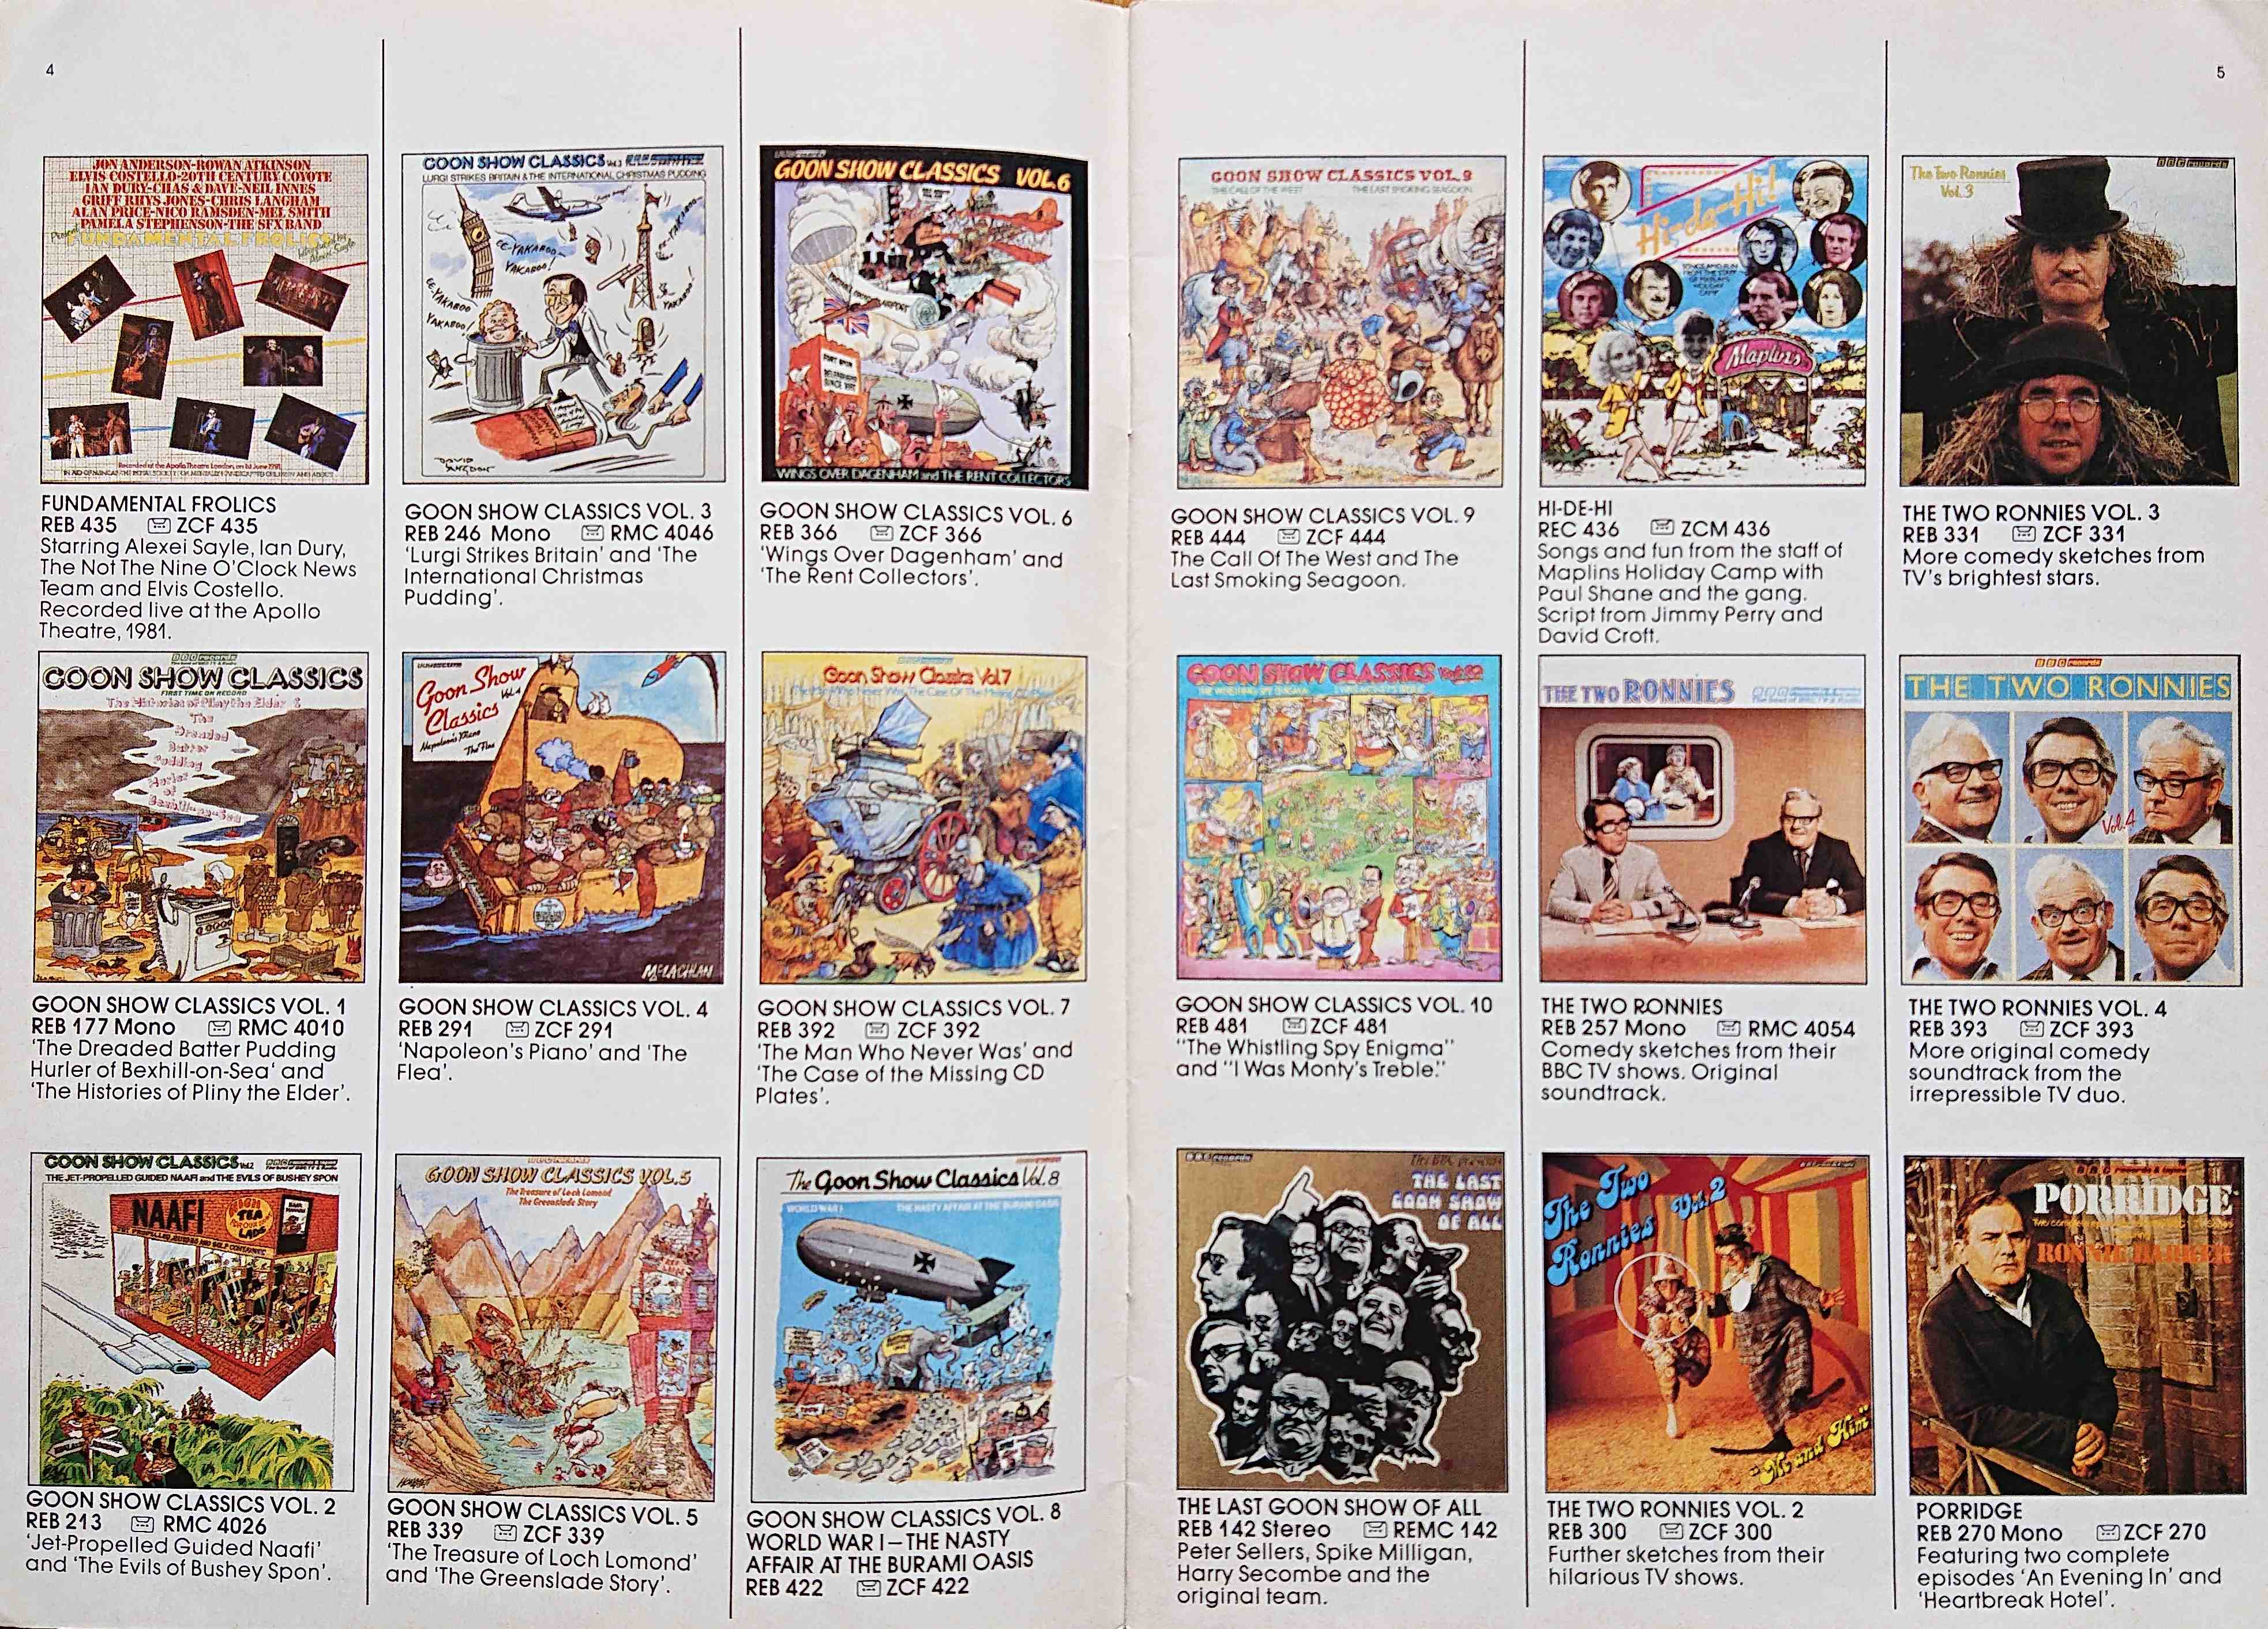 Other pages of catalogue BBC Records catalogue 1982